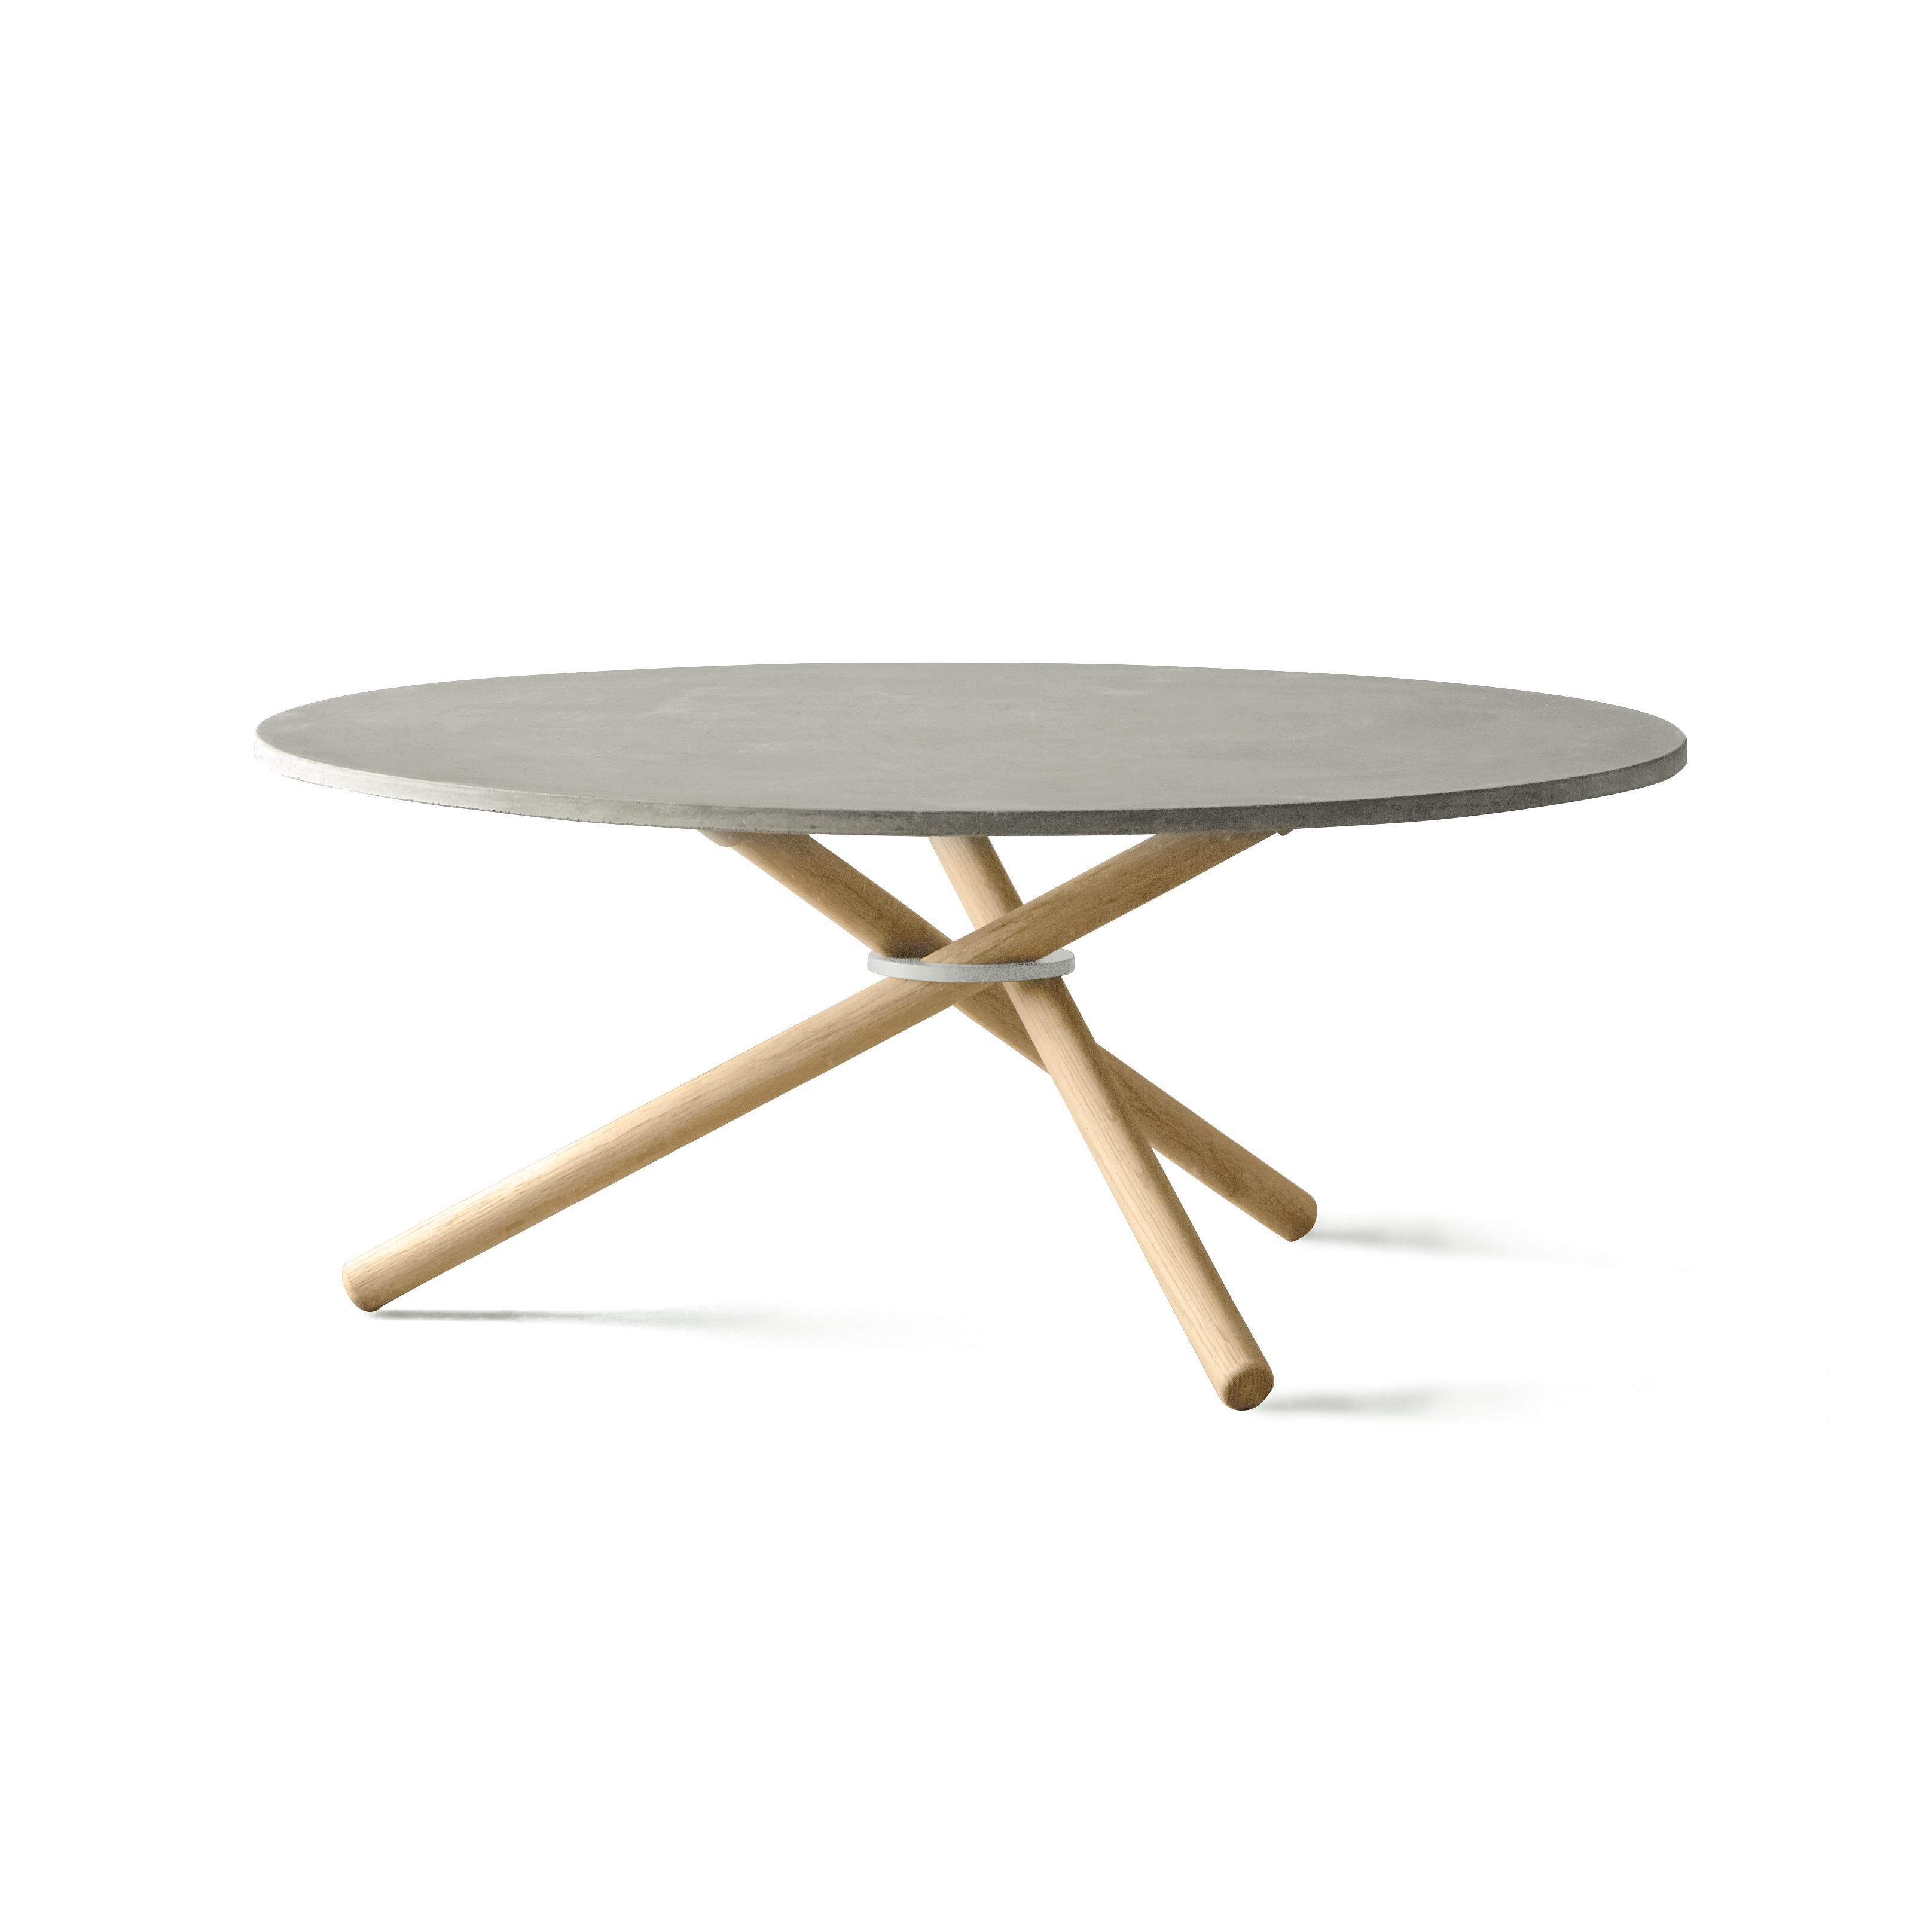 Bertha is a versatile and spacious coffee table. The table is constructed by three sub elements: The assembly ring, wooden legs and table top in either concrete, oak or birch. The almost floating table top and the sculptural impression of the legs,